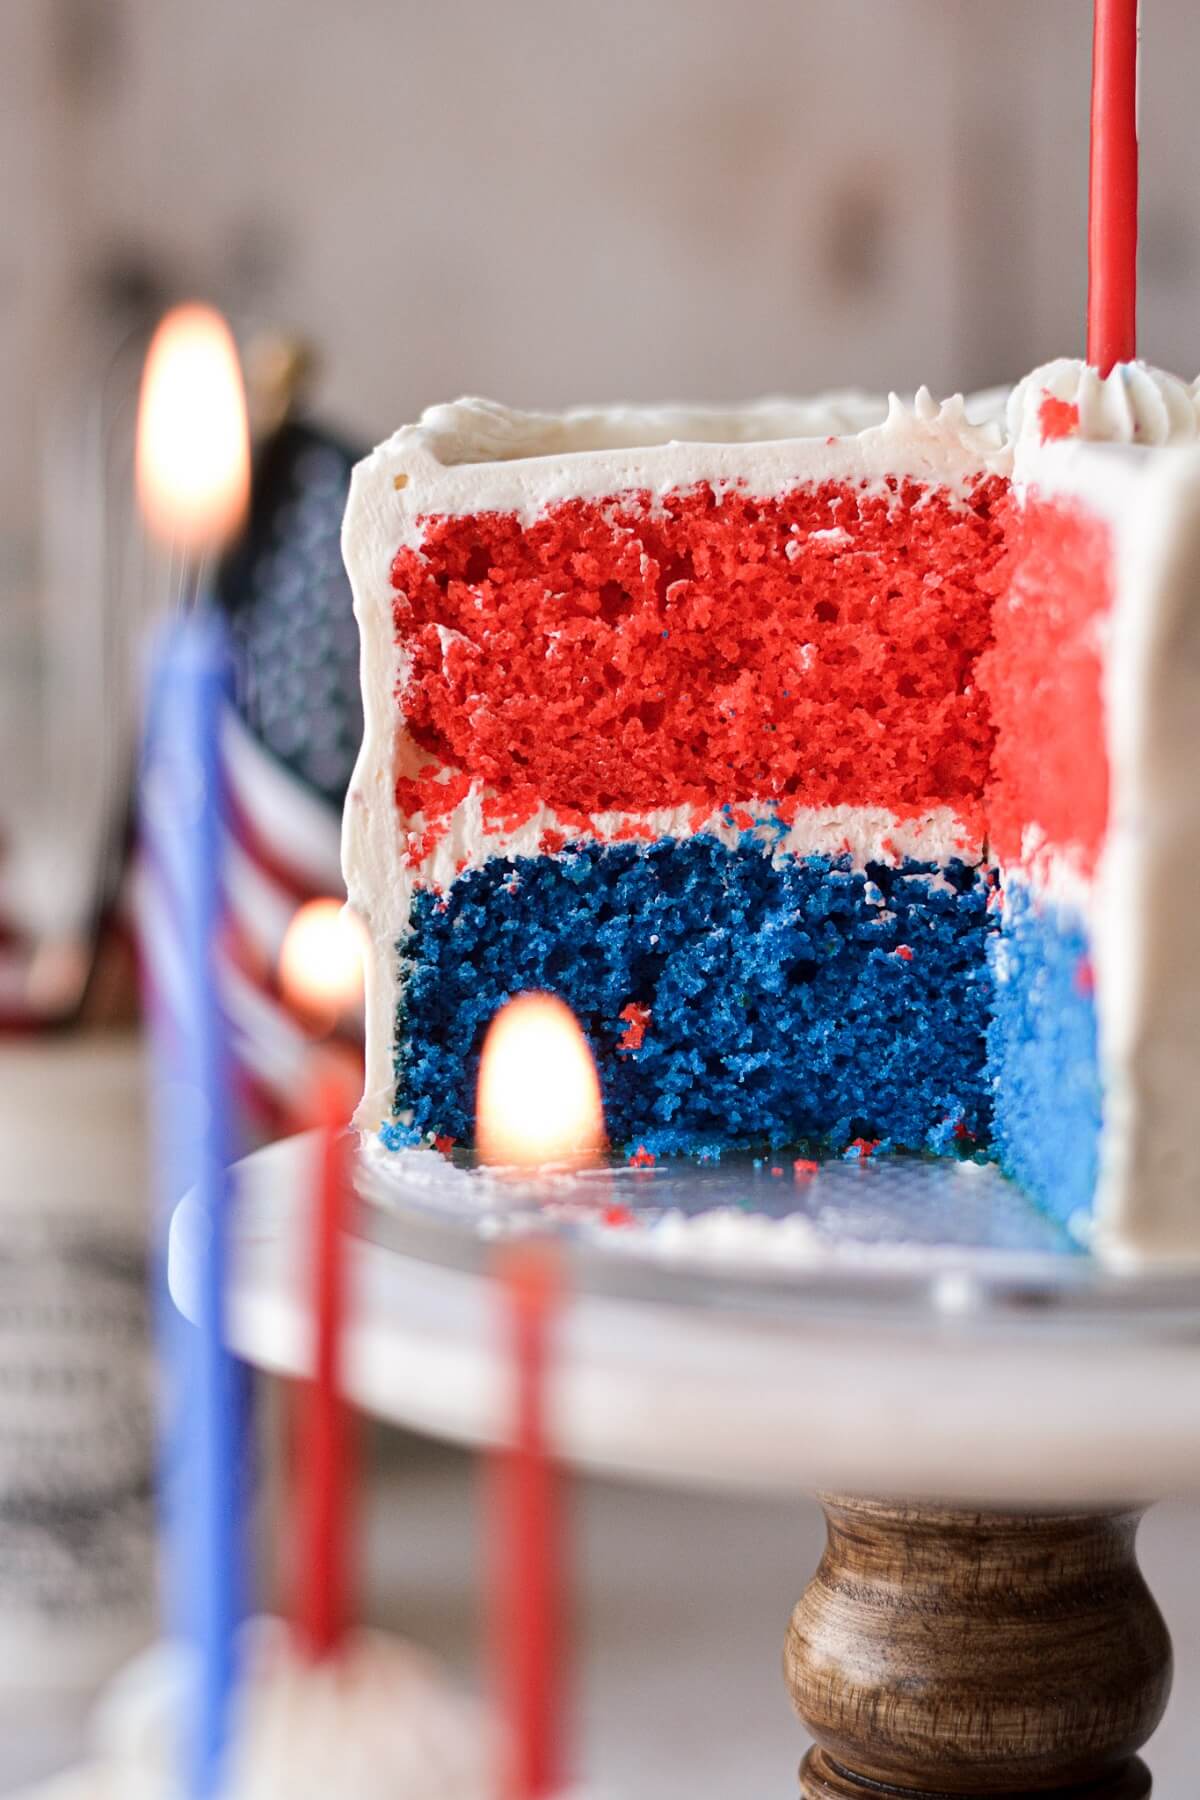 Red, white and blue cake with a slice cut.